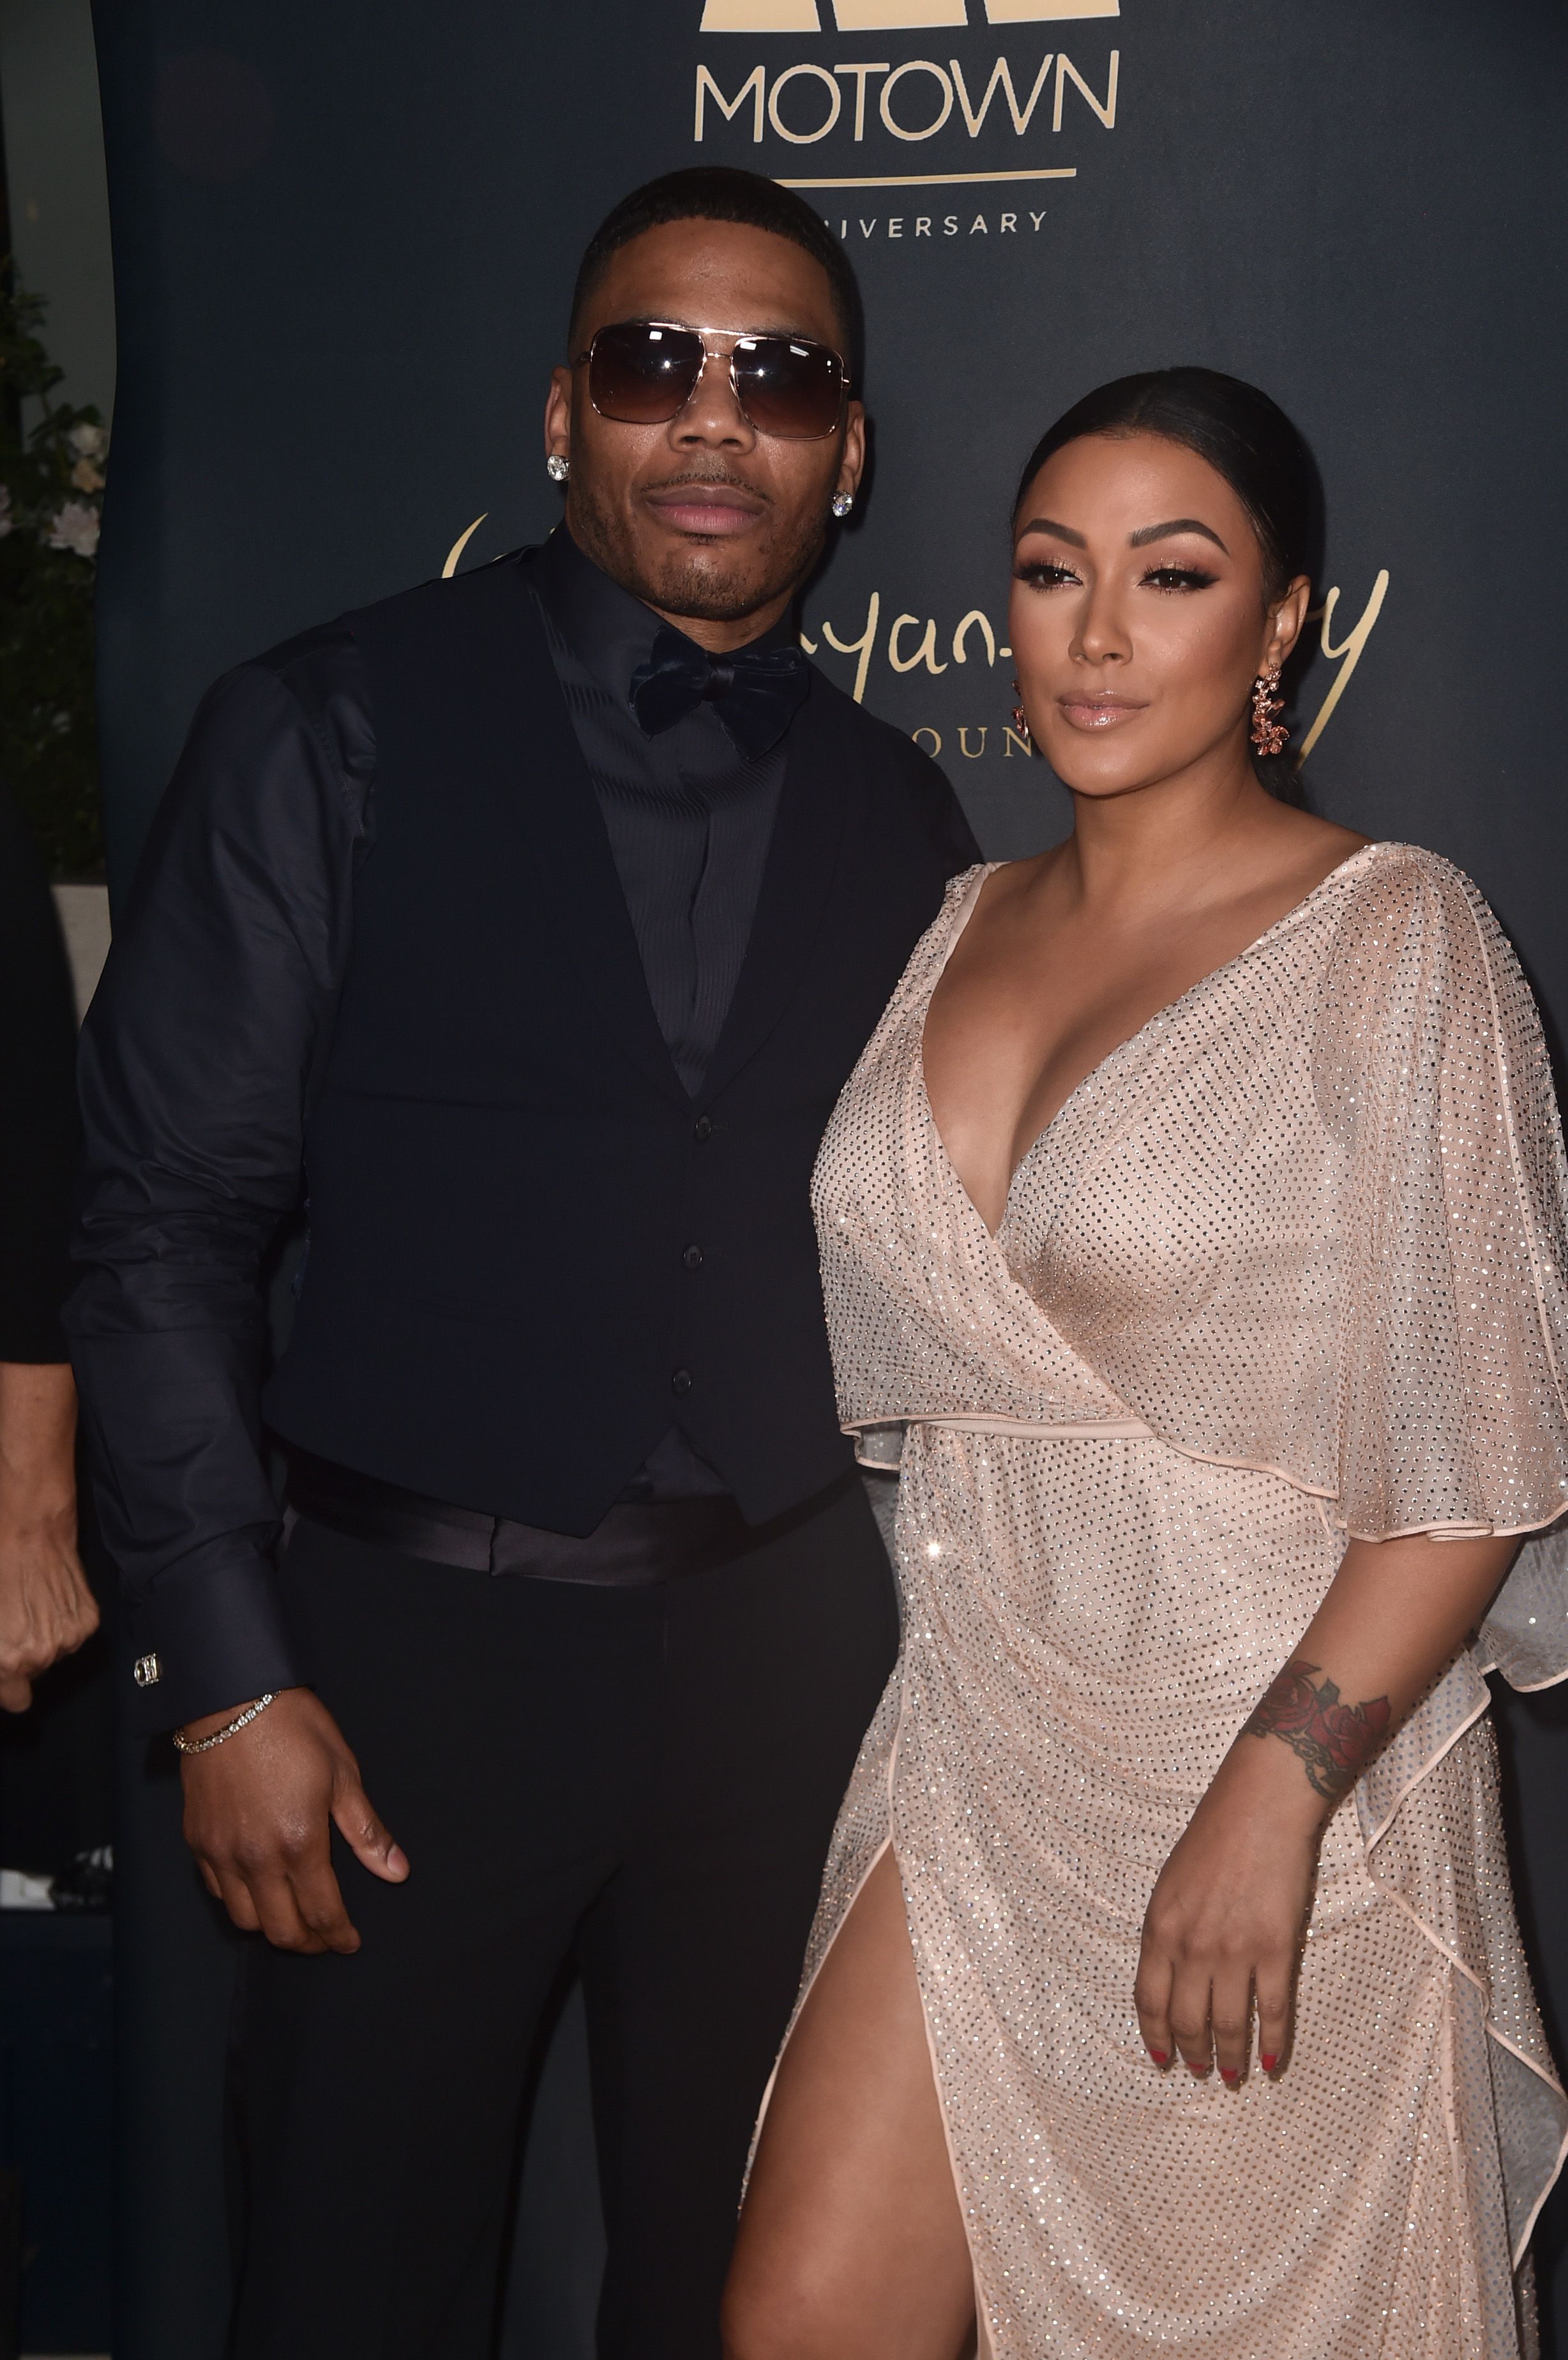 Nelly and Shantel Jackson attend the Ryan Gordy Foundation's celebration of 60 Years of Mowtown in 2019. | Photo: Getty Images